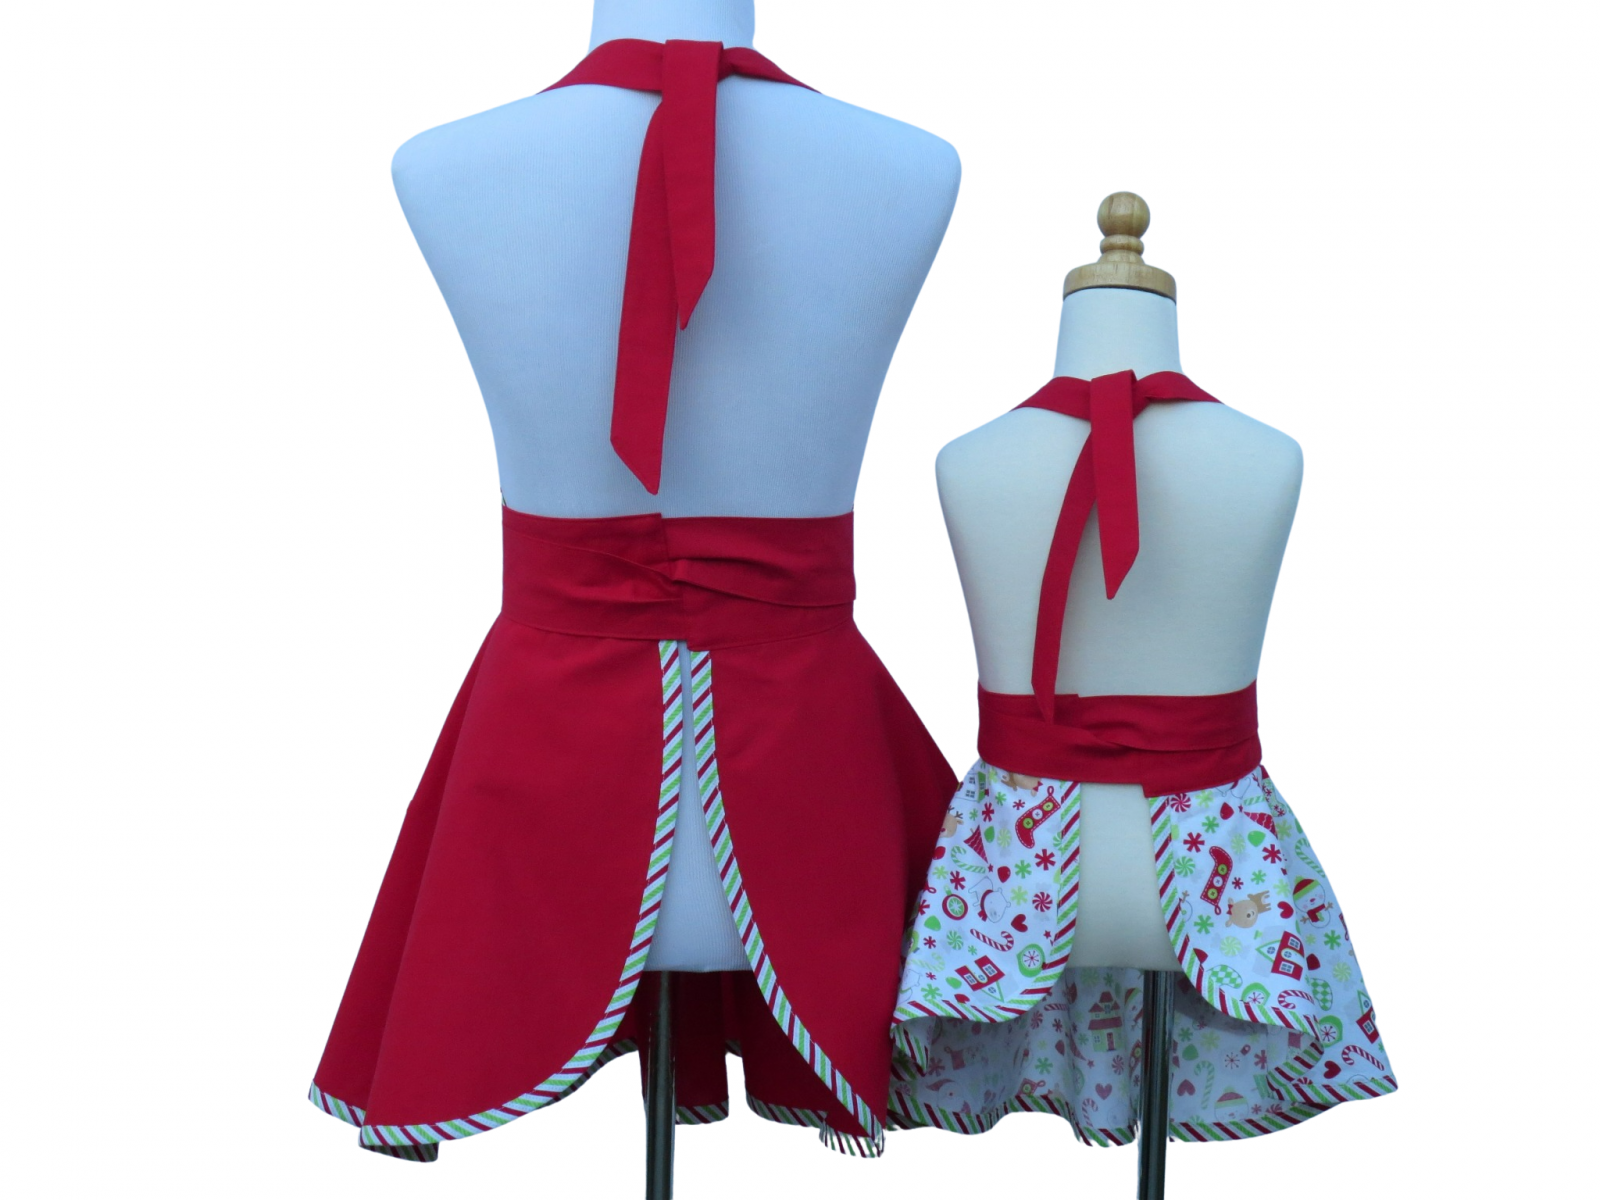 https://www.stitchedbybeverly.com/sites/stitchedbybeverly.indiemade.com/files/imagecache/im_clientsite_product_zoom/mother_daughter_christmas_holiday_retro_style_apron_set_back_views_tied_in_front.jpg